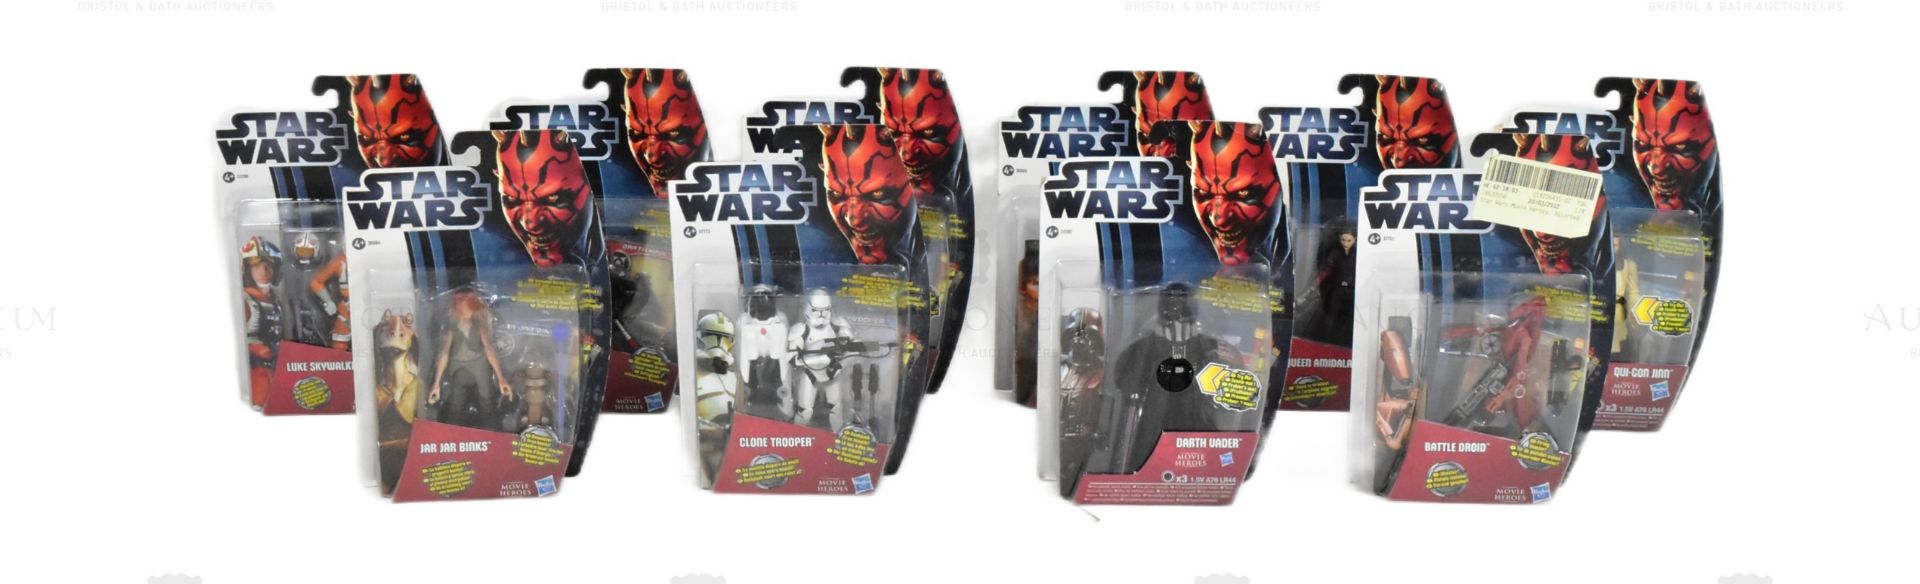 STAR WARS - 2012 HASBRO MOVIE HEROES CARDED ACTION FIGURES